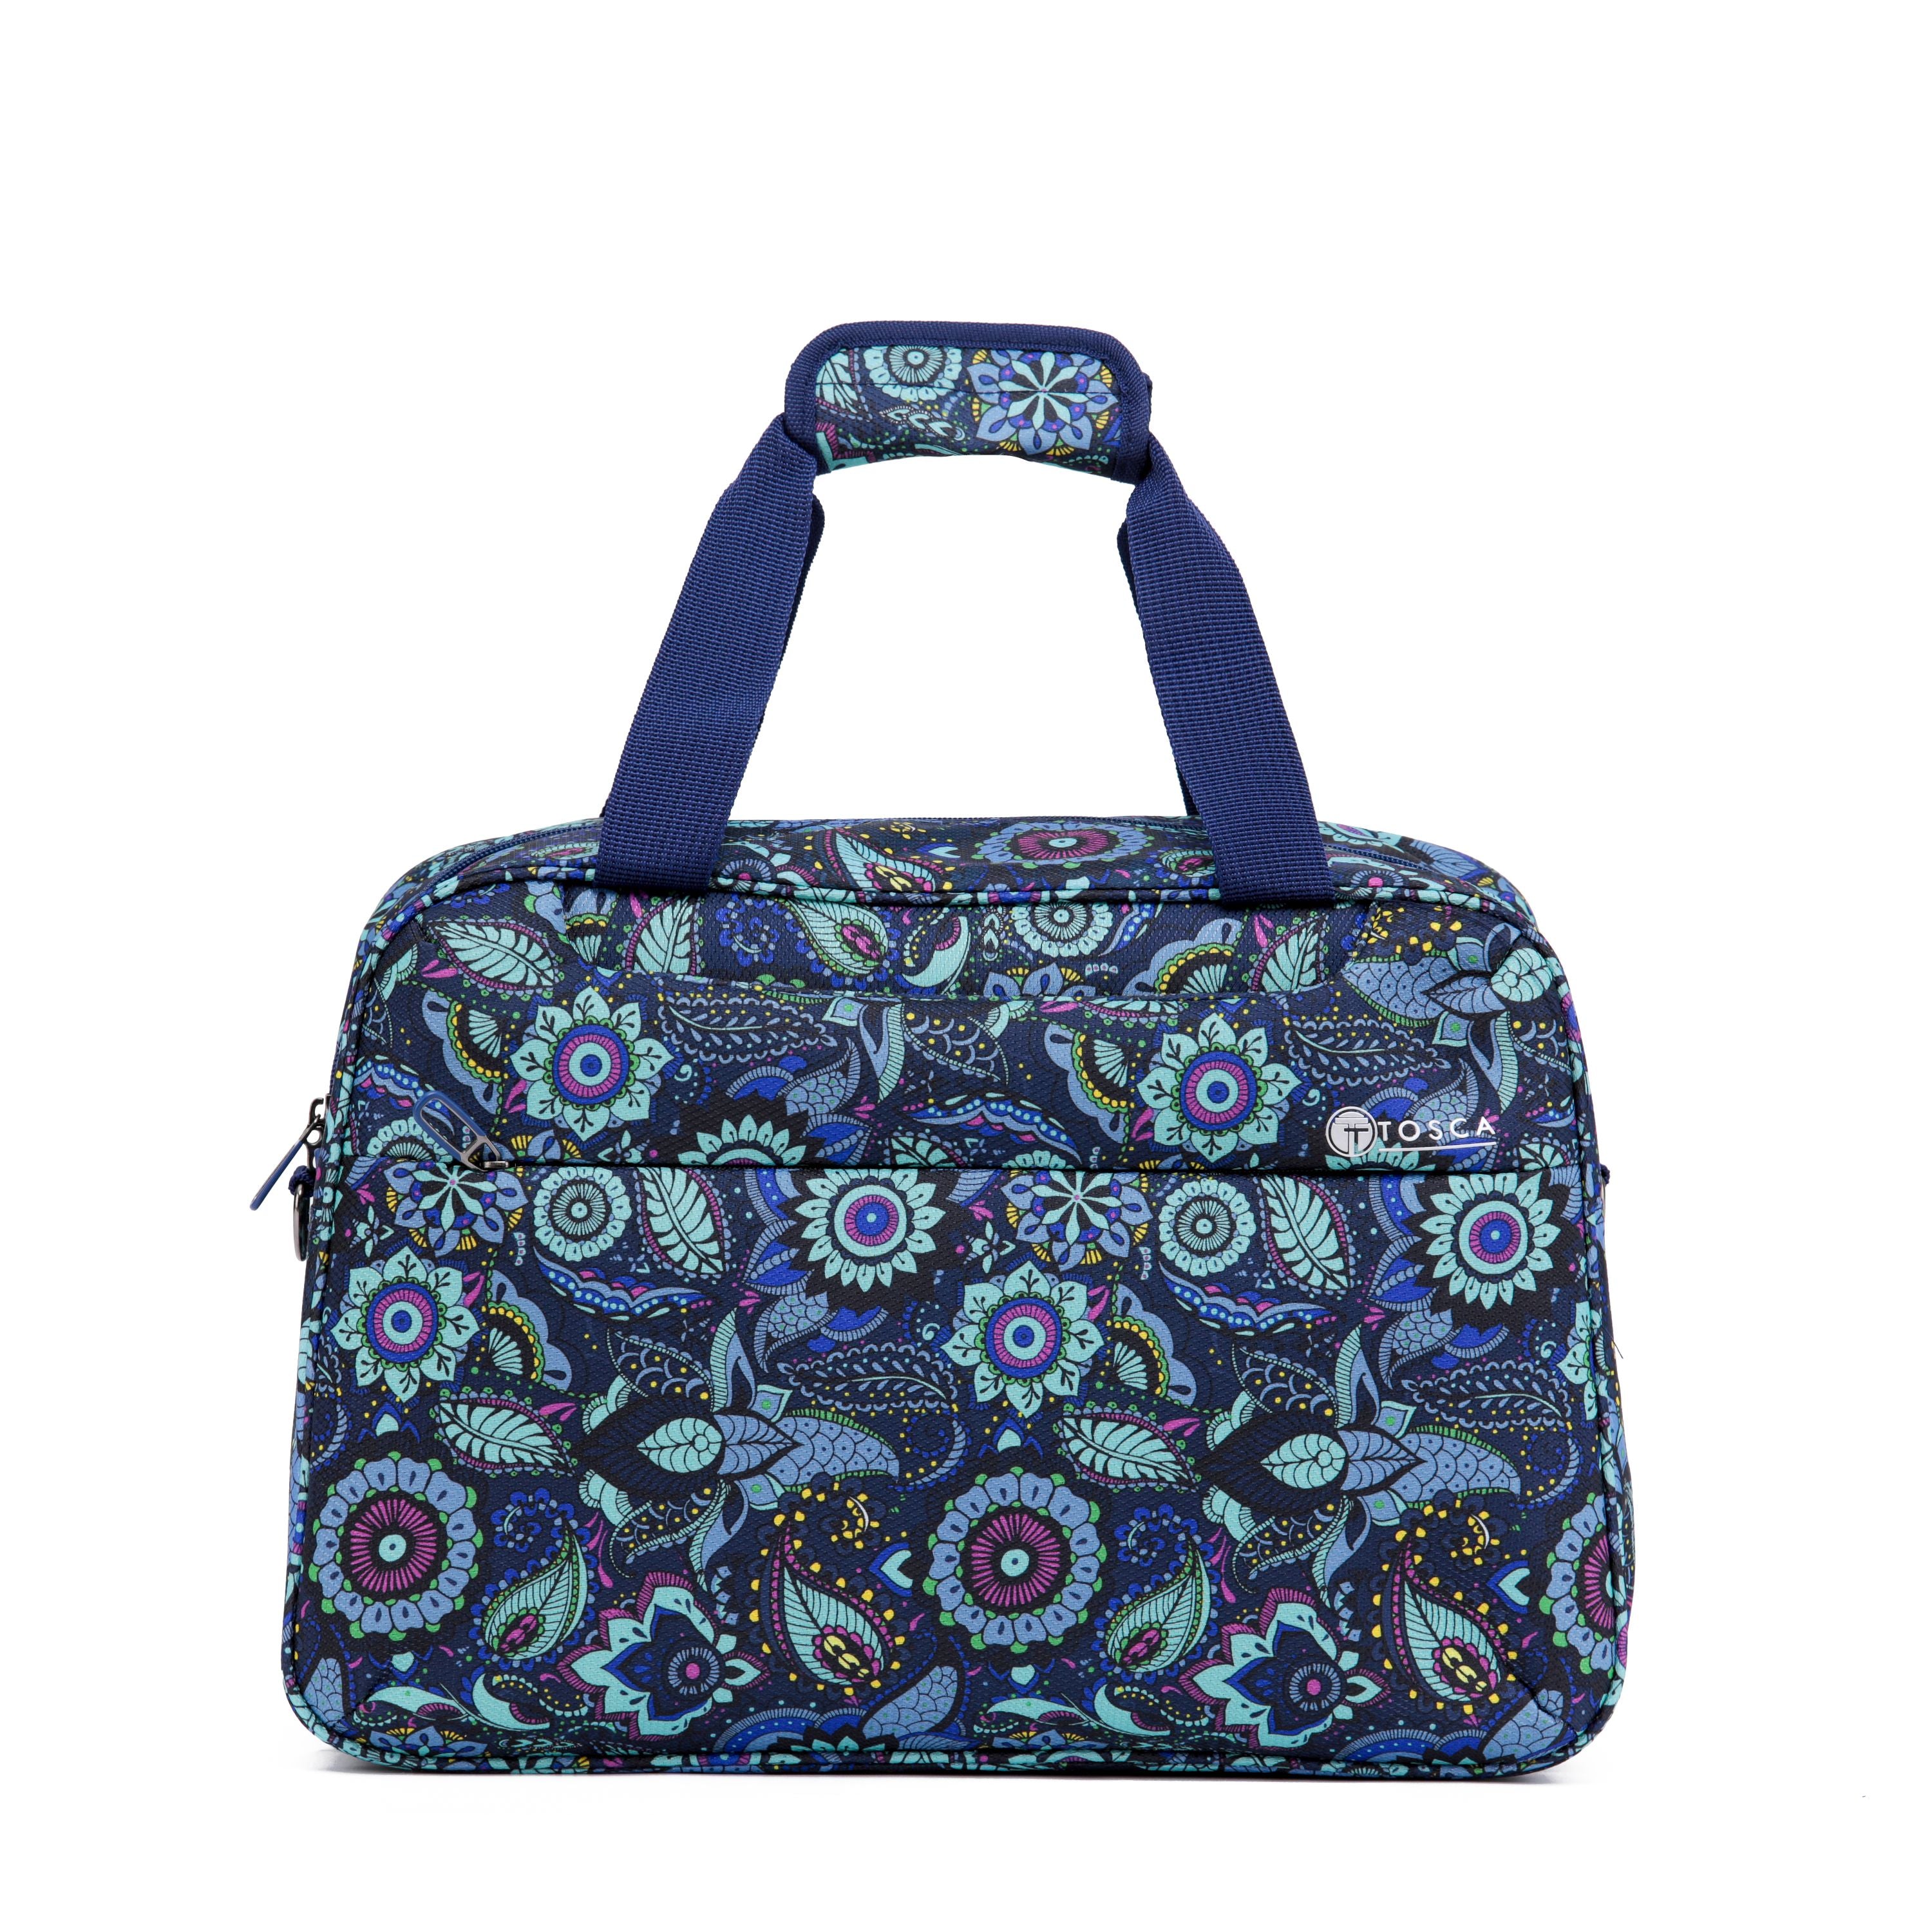 Tosca - So Lite 3.0 Onboard Tote - Paisley-1